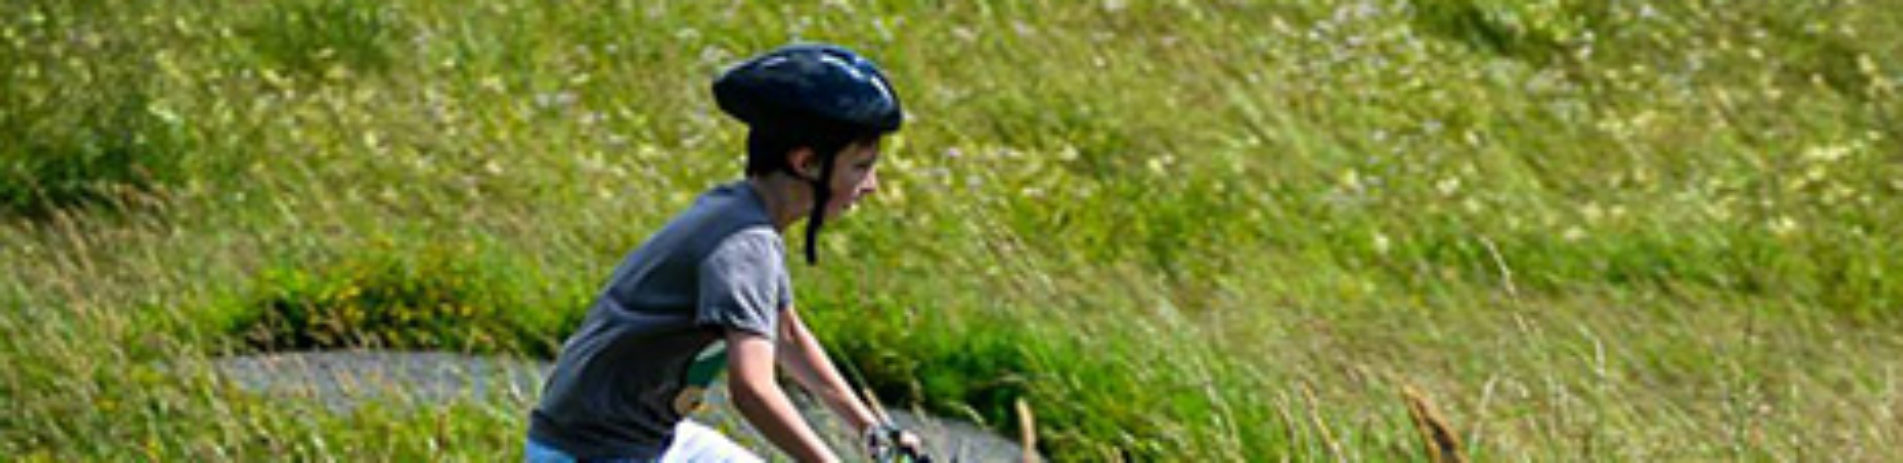 young-boy-cycling-in-grassland